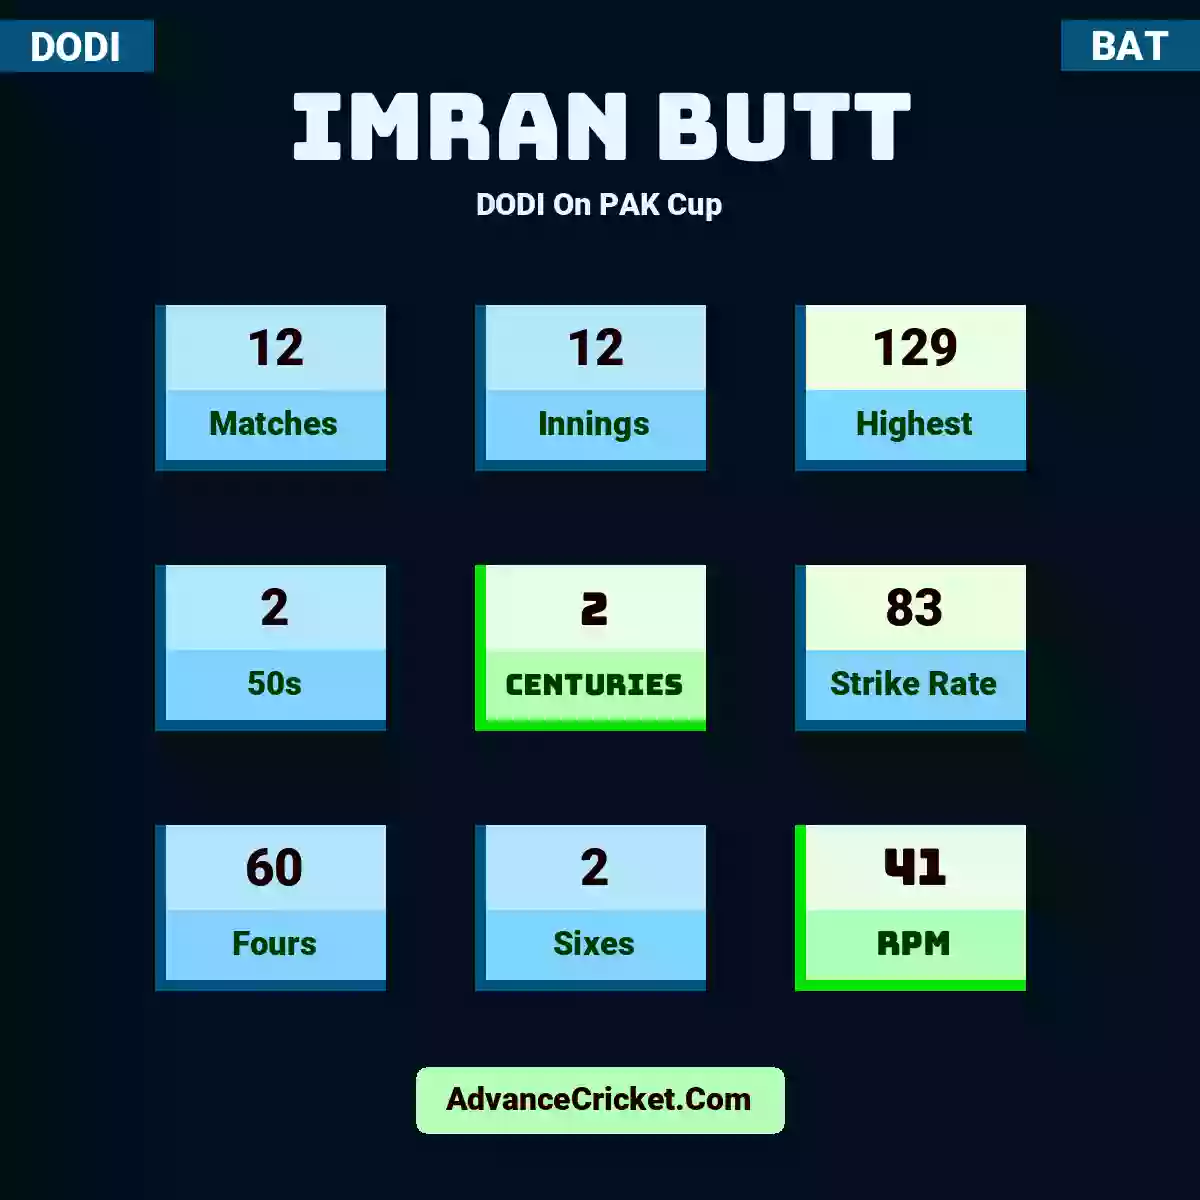 Imran Butt DODI  On PAK Cup, Imran Butt played 12 matches, scored 129 runs as highest, 2 half-centuries, and 2 centuries, with a strike rate of 83. I.Butt hit 60 fours and 2 sixes, with an RPM of 41.